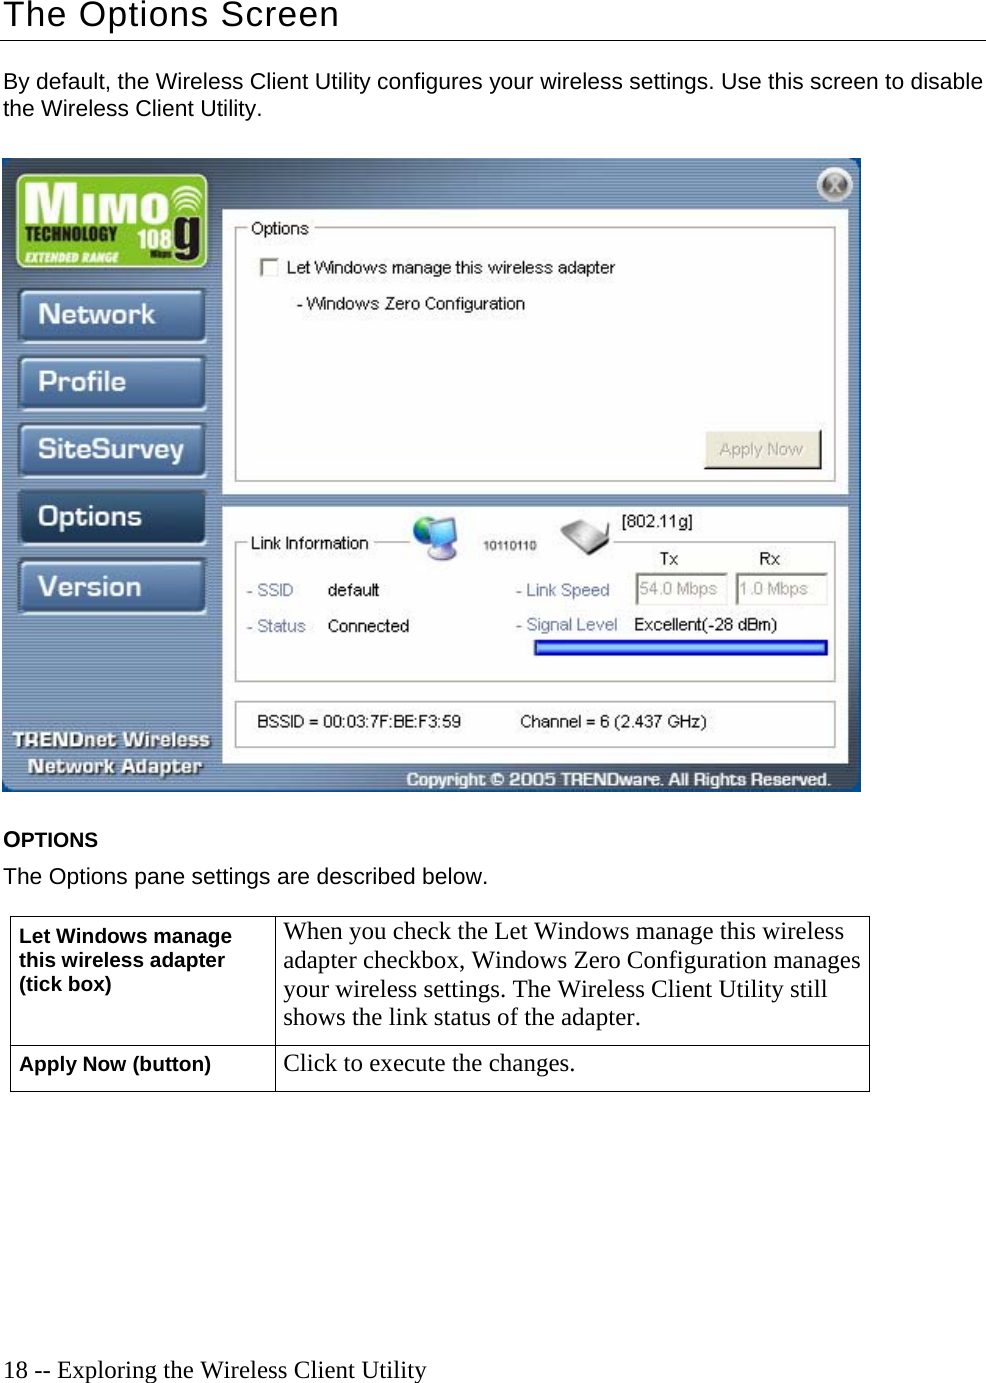   18 -- Exploring the Wireless Client Utility The Options Screen By default, the Wireless Client Utility configures your wireless settings. Use this screen to disable the Wireless Client Utility.    OPTIONS The Options pane settings are described below. Let Windows manage this wireless adapter (tick box) When you check the Let Windows manage this wireless adapter checkbox, Windows Zero Configuration manages your wireless settings. The Wireless Client Utility still shows the link status of the adapter. Apply Now (button) Click to execute the changes.  